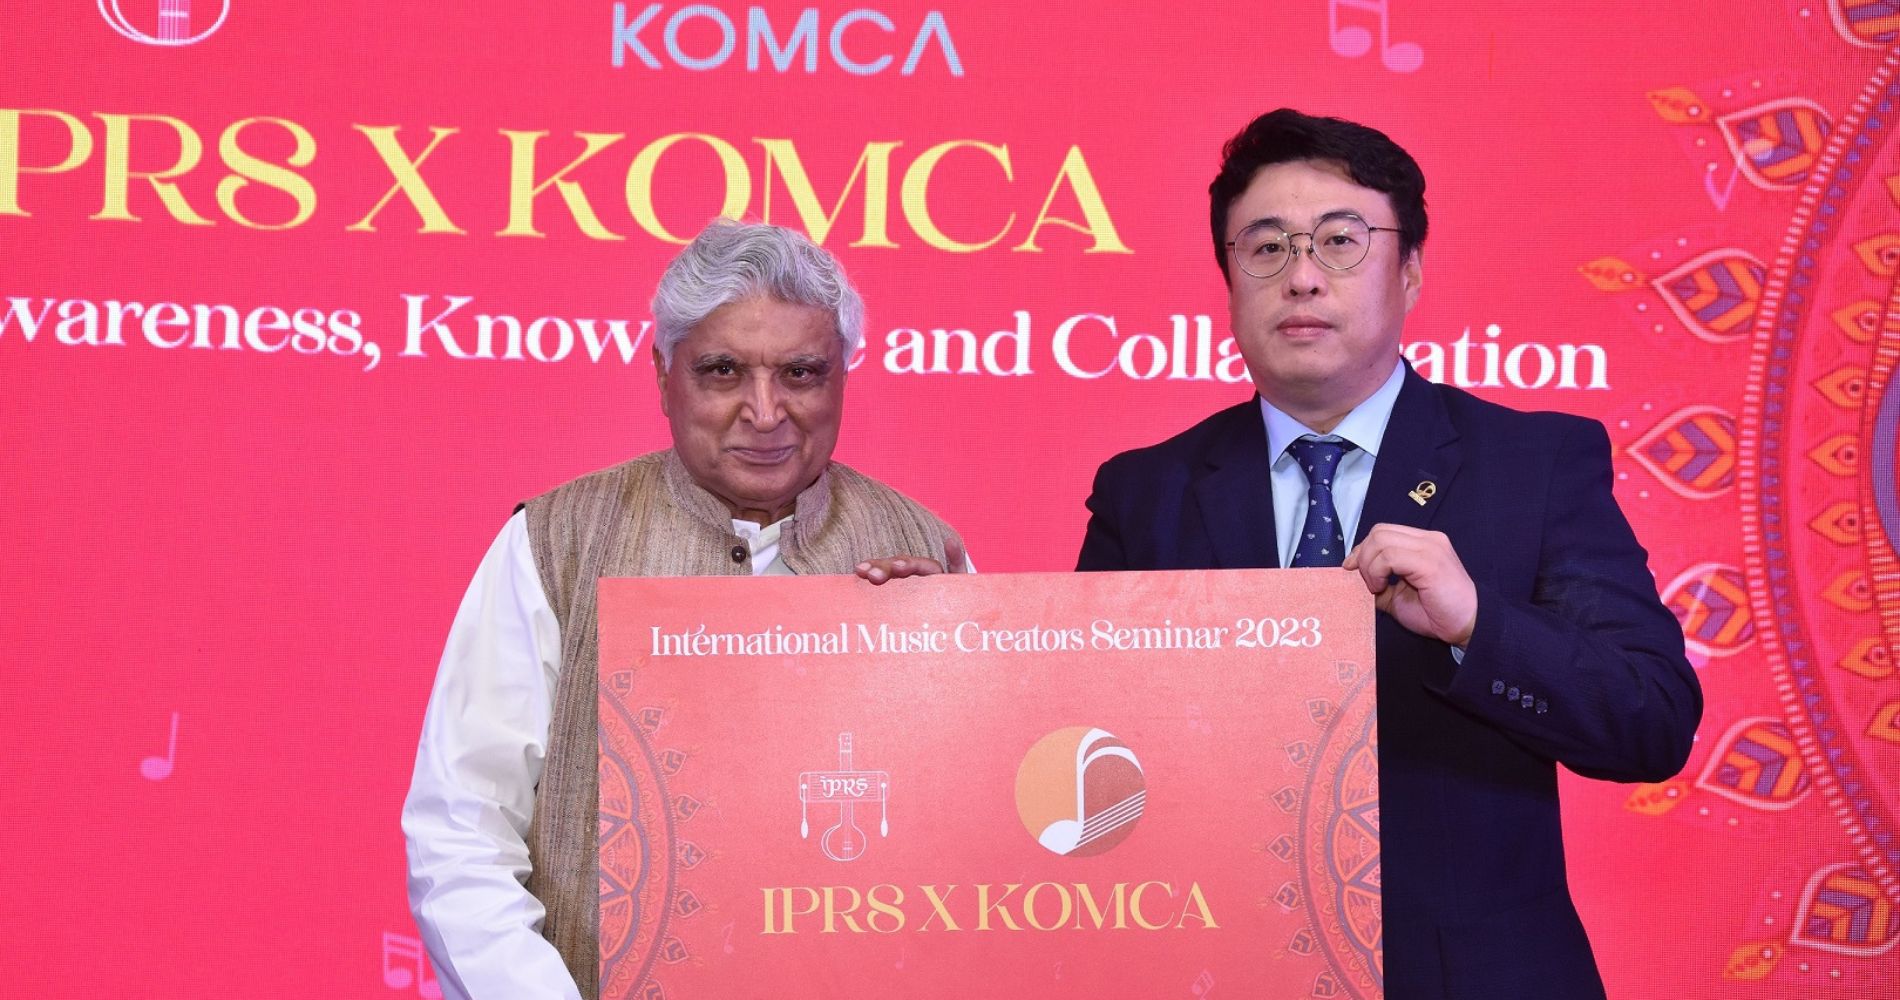 India And Korea Join Forces: IPRS And KOMCA's MOU Sparks A New Era Of Collaboration In Music